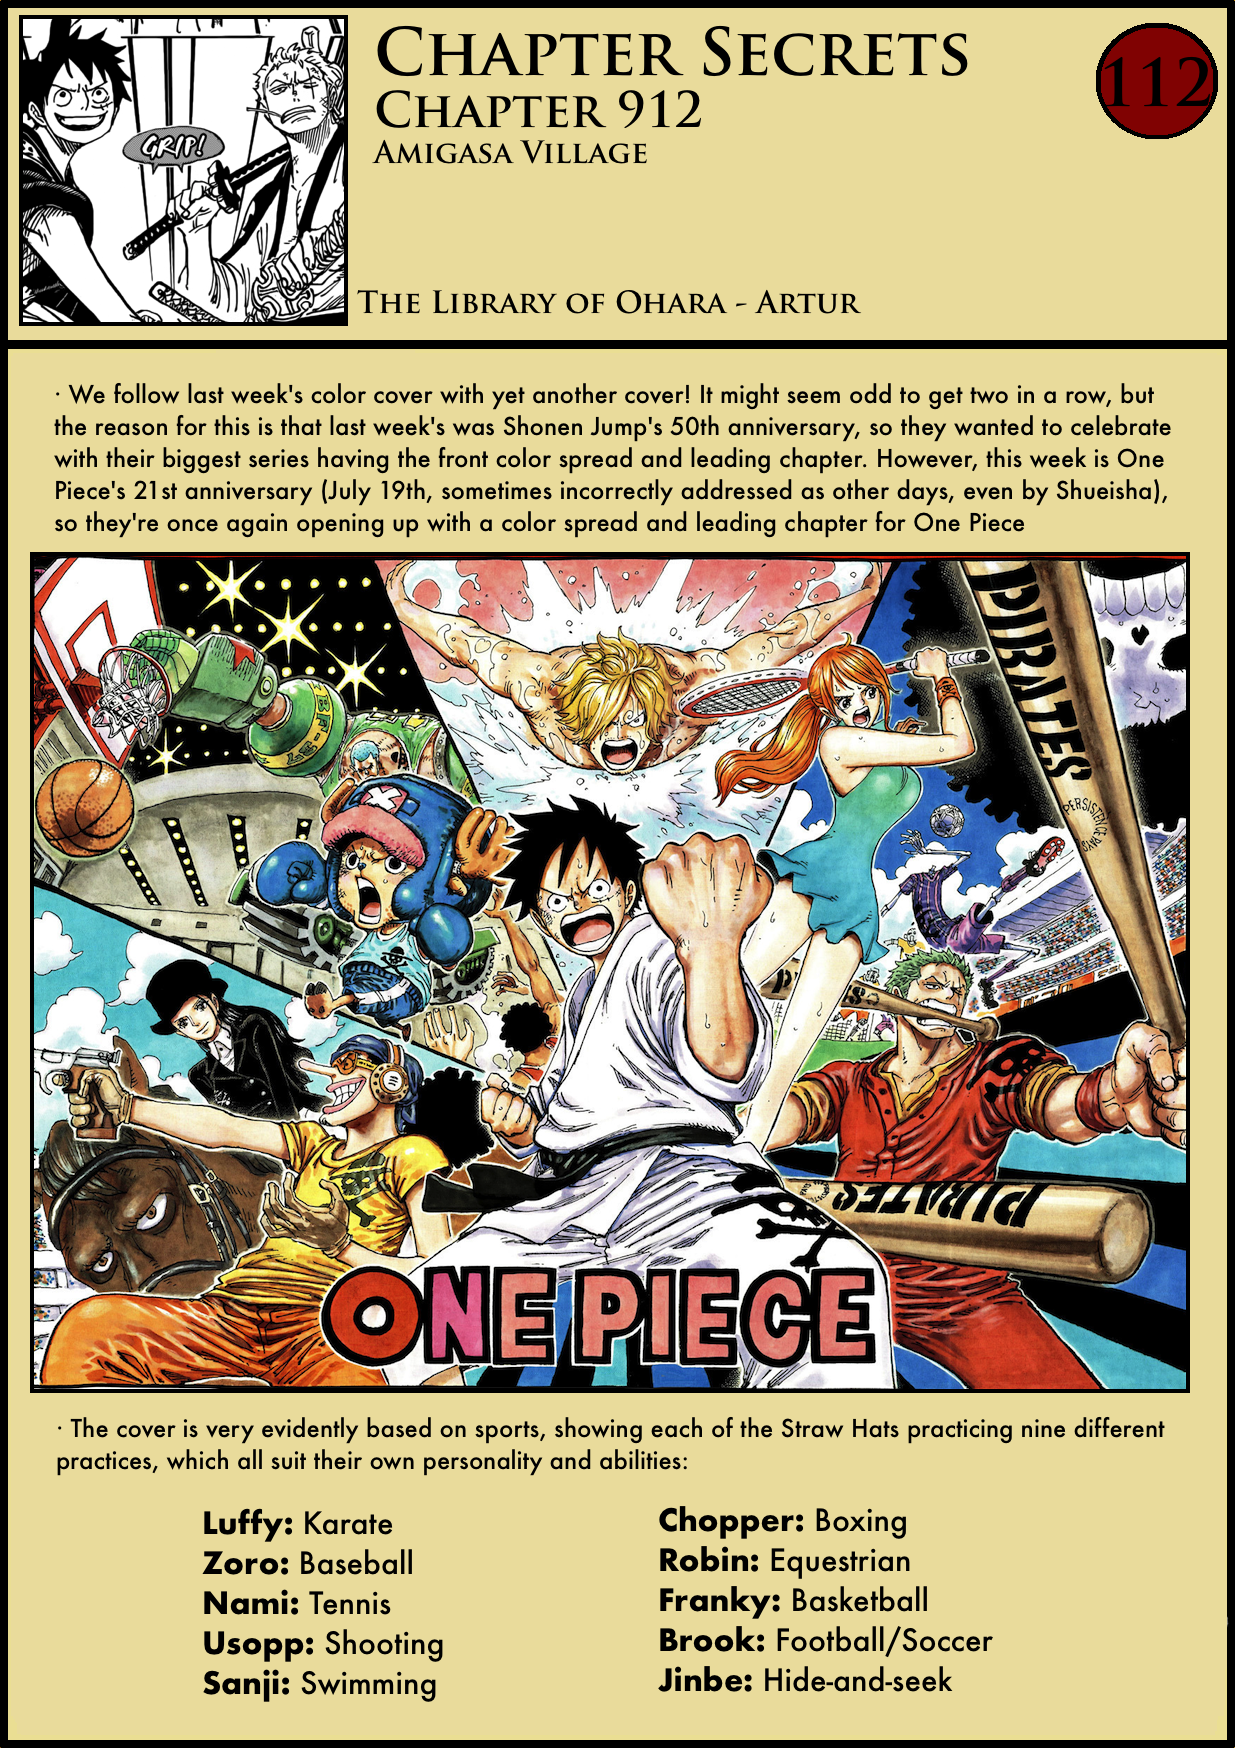 Chapter Secrets Chapter 912 In Depth Analysis The Library Of Ohara